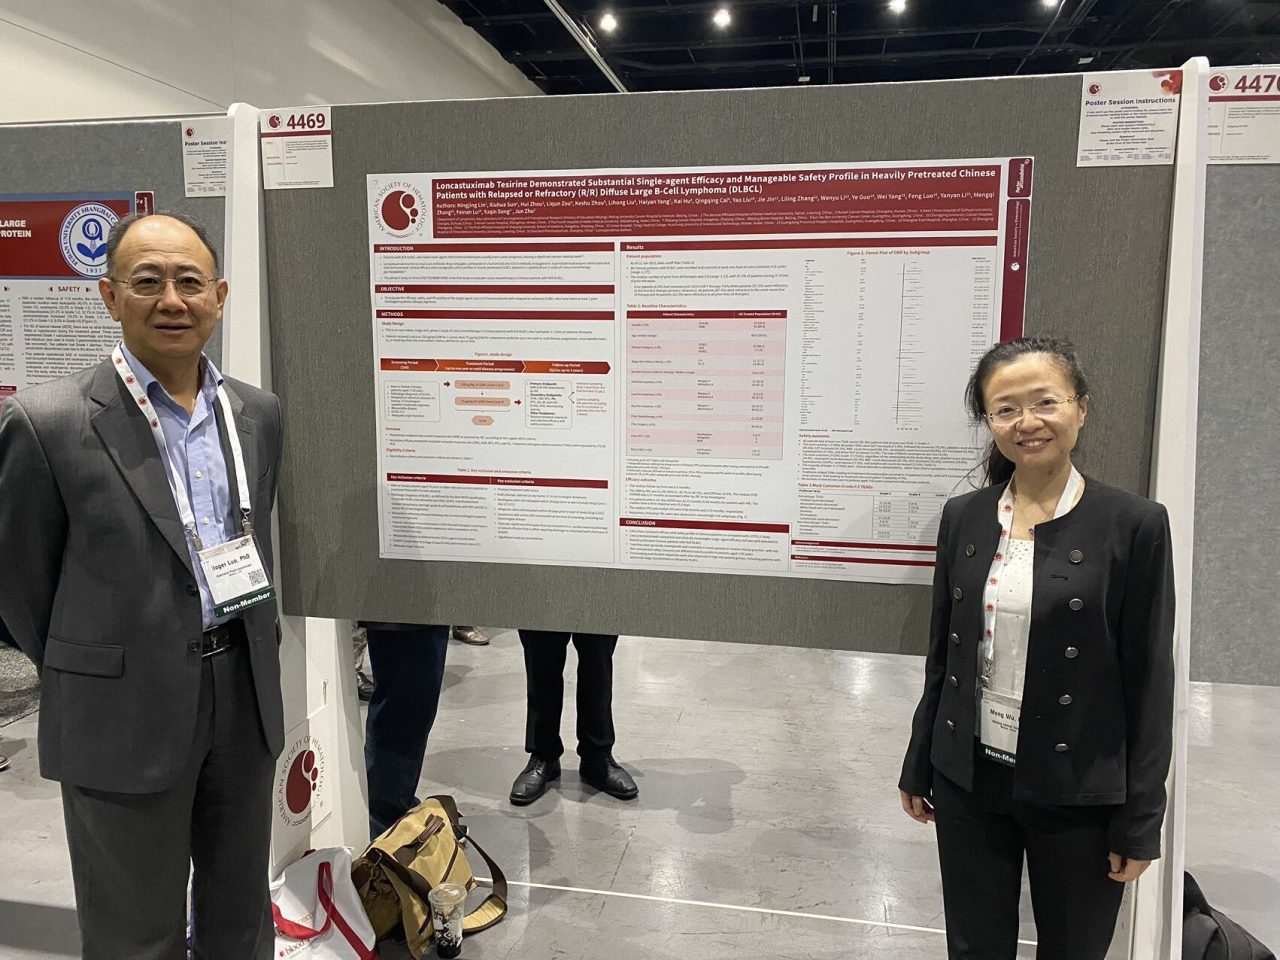 Feng Roger Luo: Primary results from a Phase 2 clinical trial evaluating ZYNLONTA® in Chinese patients with relapsed or refractory DLBCL